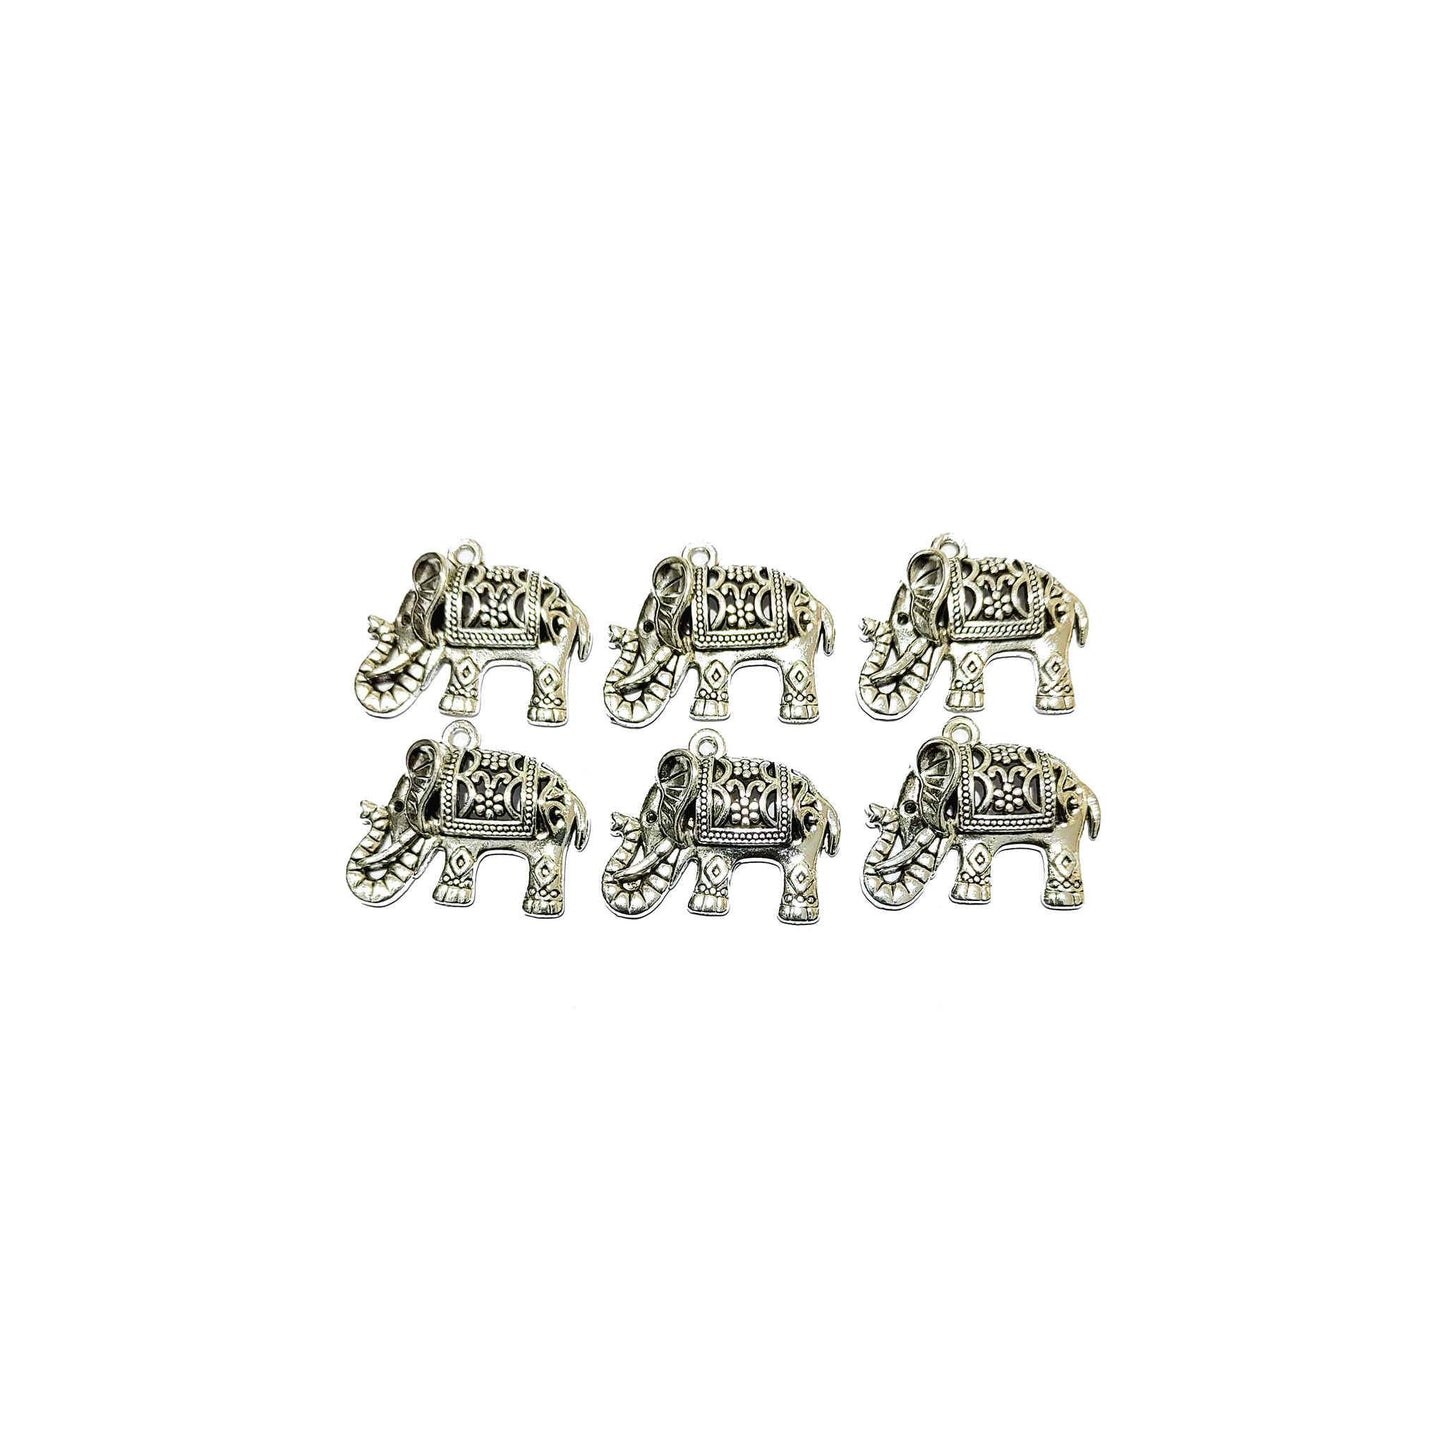 Indian Petals Beautiful Flat Base Metal Elephant Cabochons for DIY Craft Trousseau Packing or Decoration - Design 407, Silver